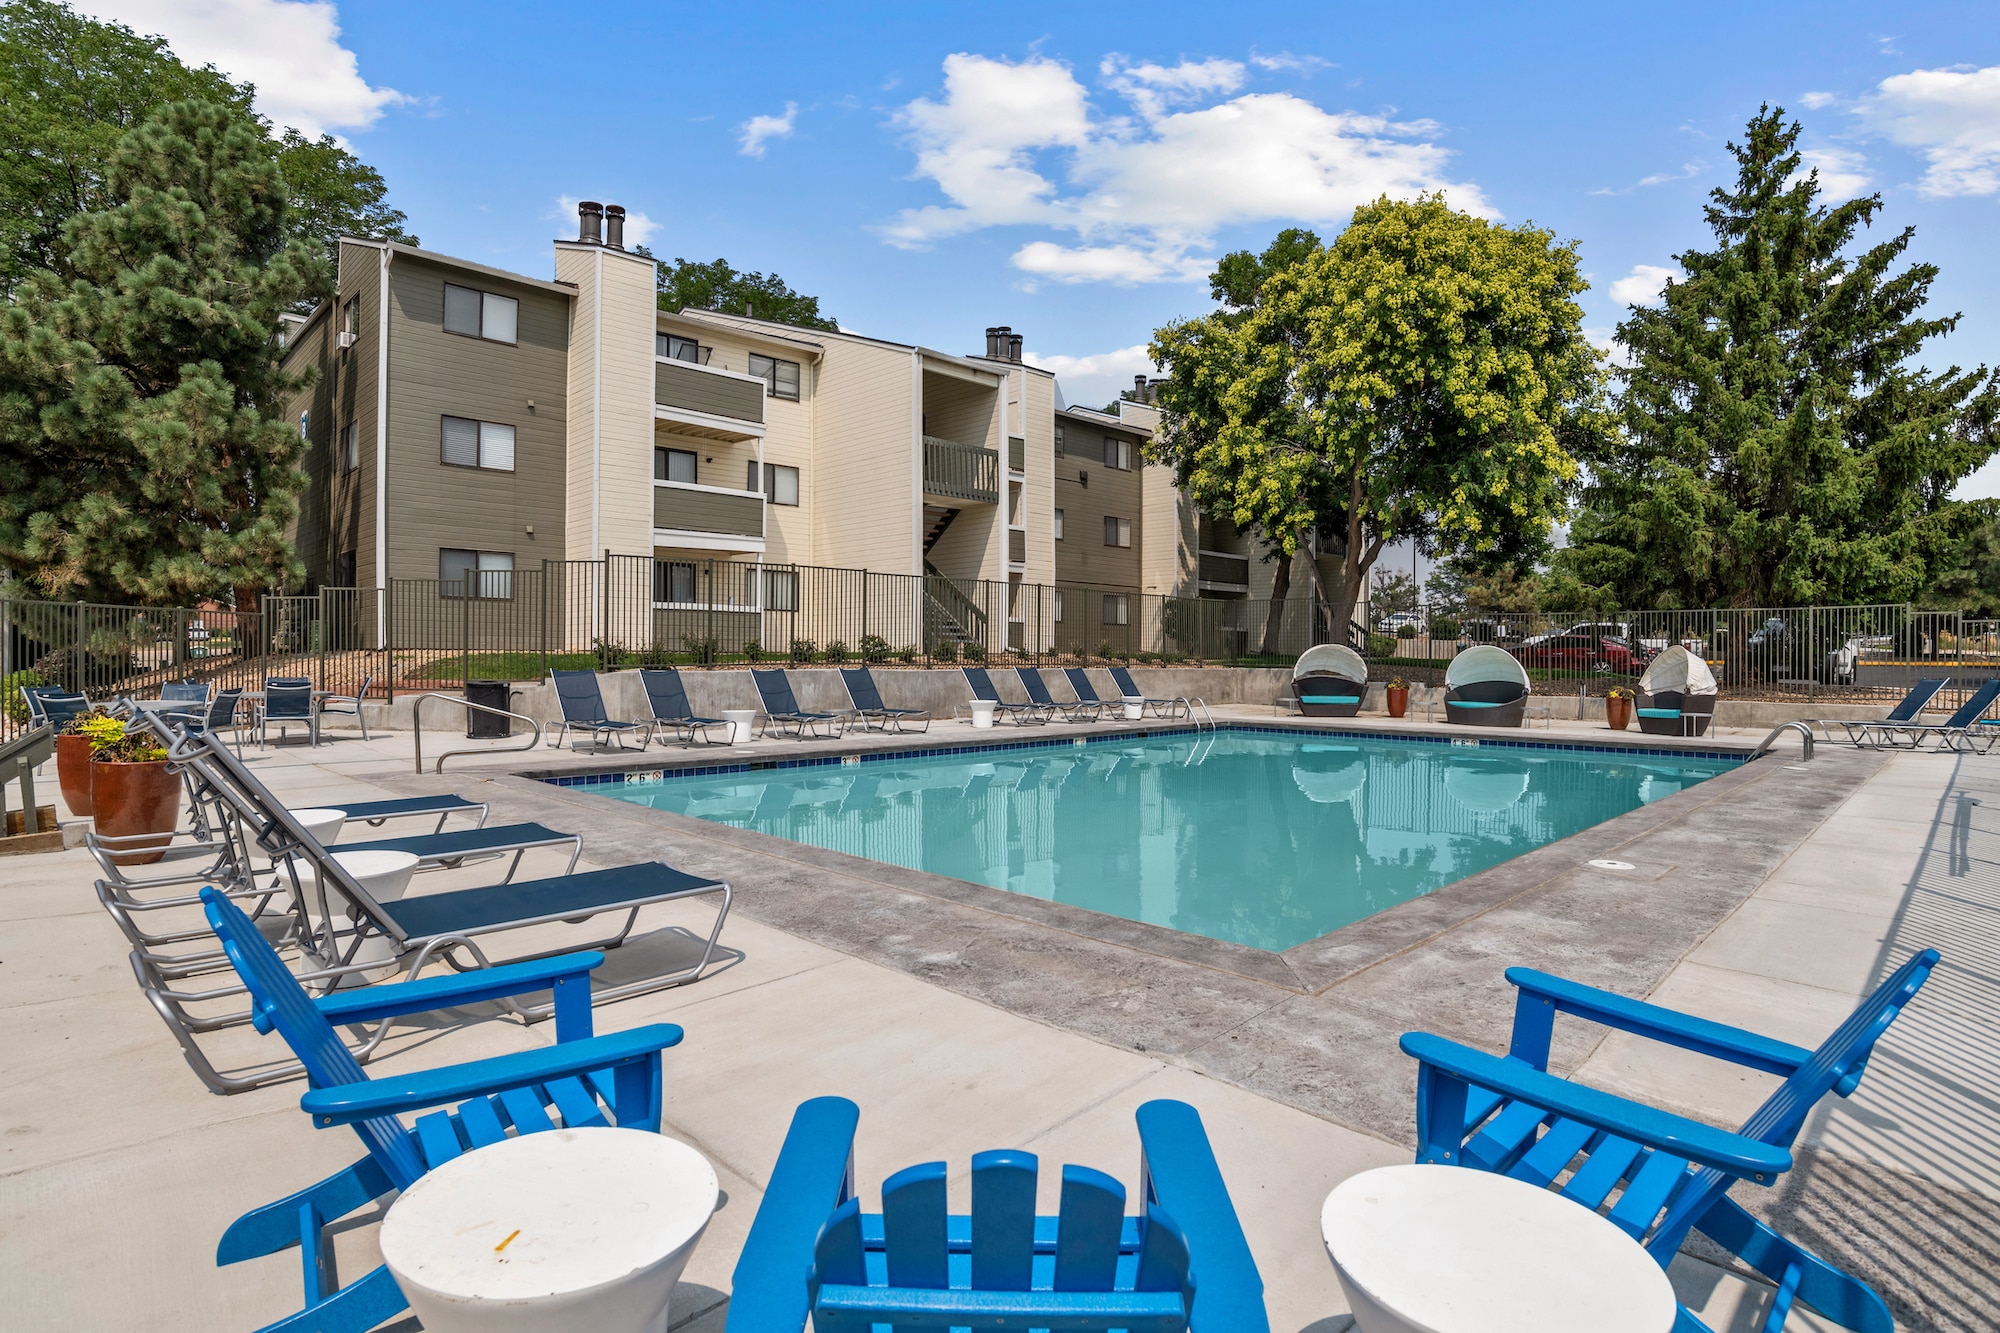 Thornton apartment complex sells for $38.5 million to top the week's Denver area sales